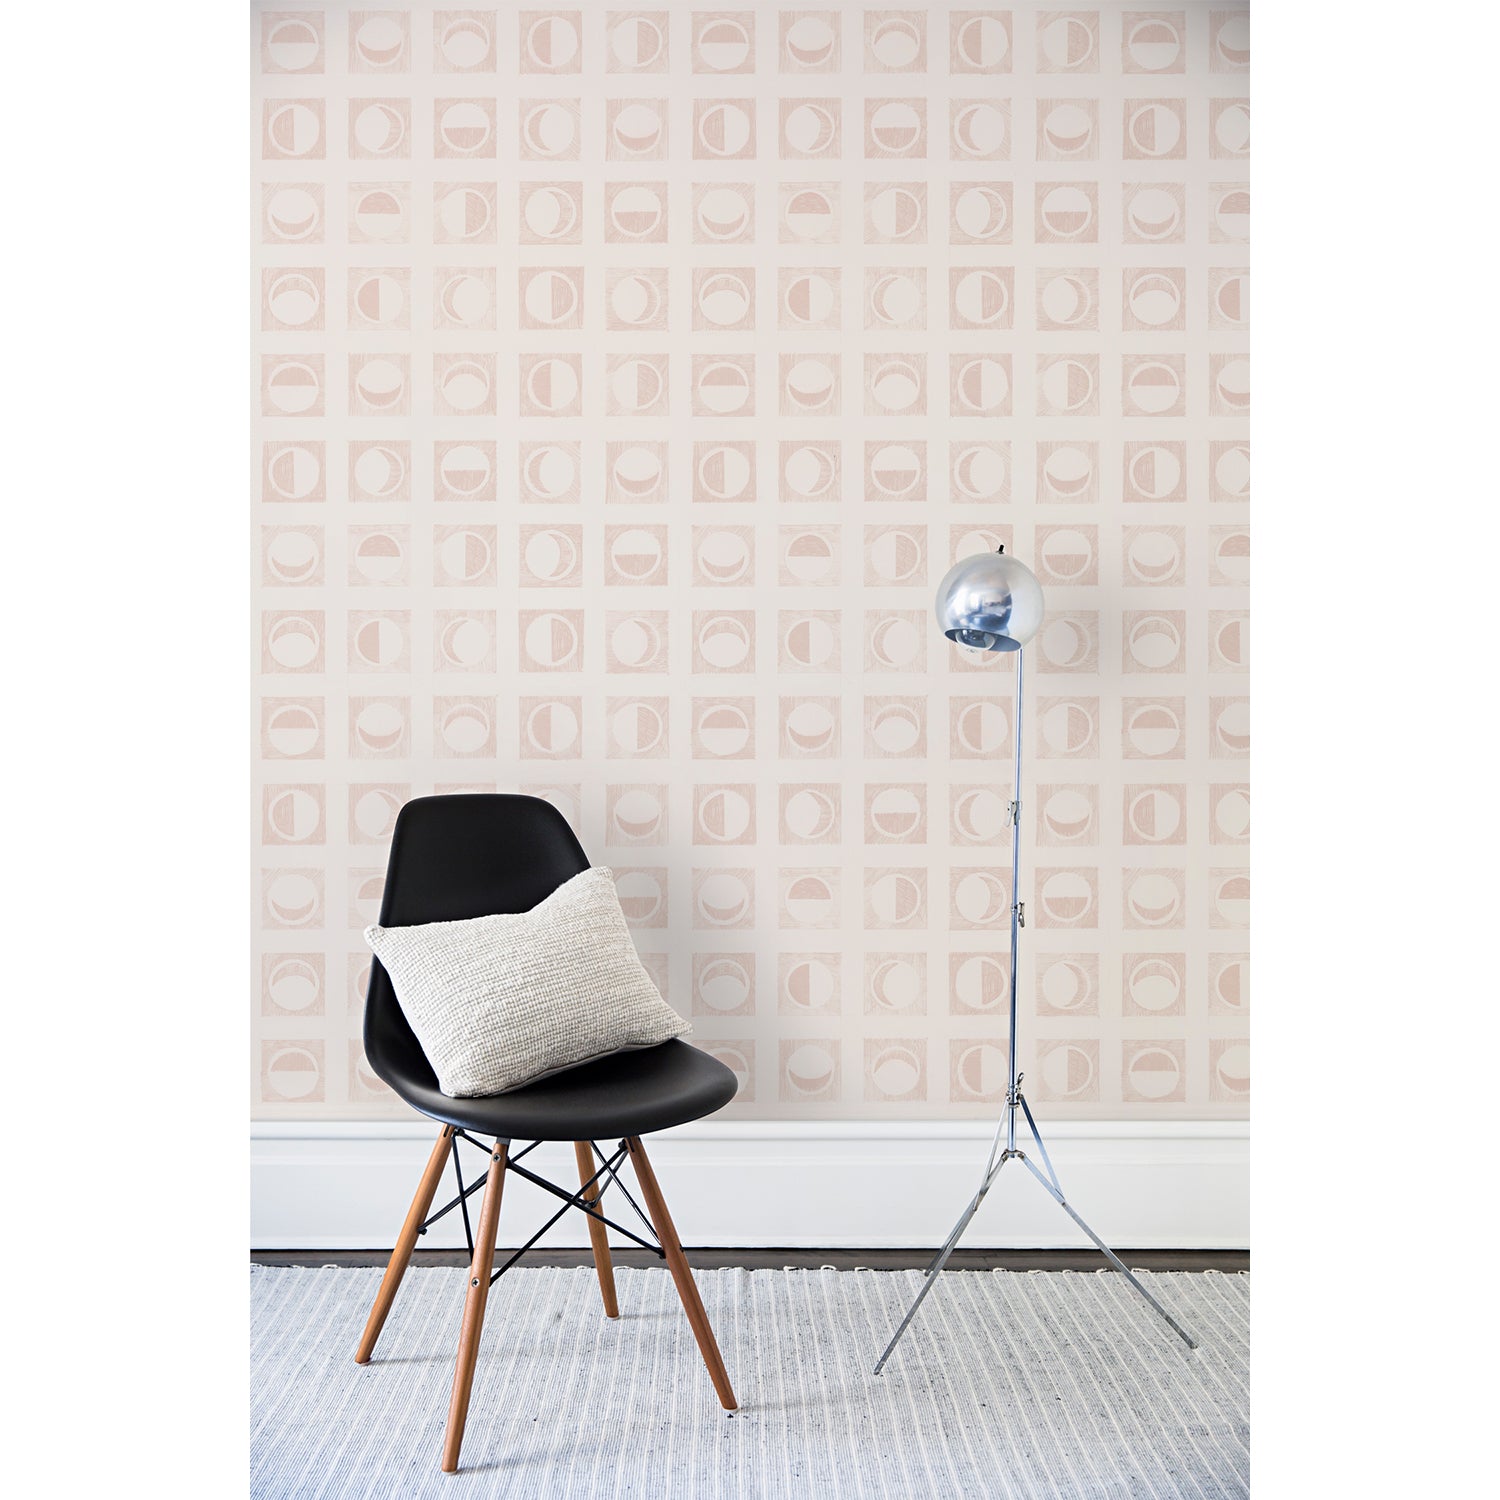 A chair and floor lamp in front of a wall papered in rows of block-printed light pink moons in various phases on a tan background.